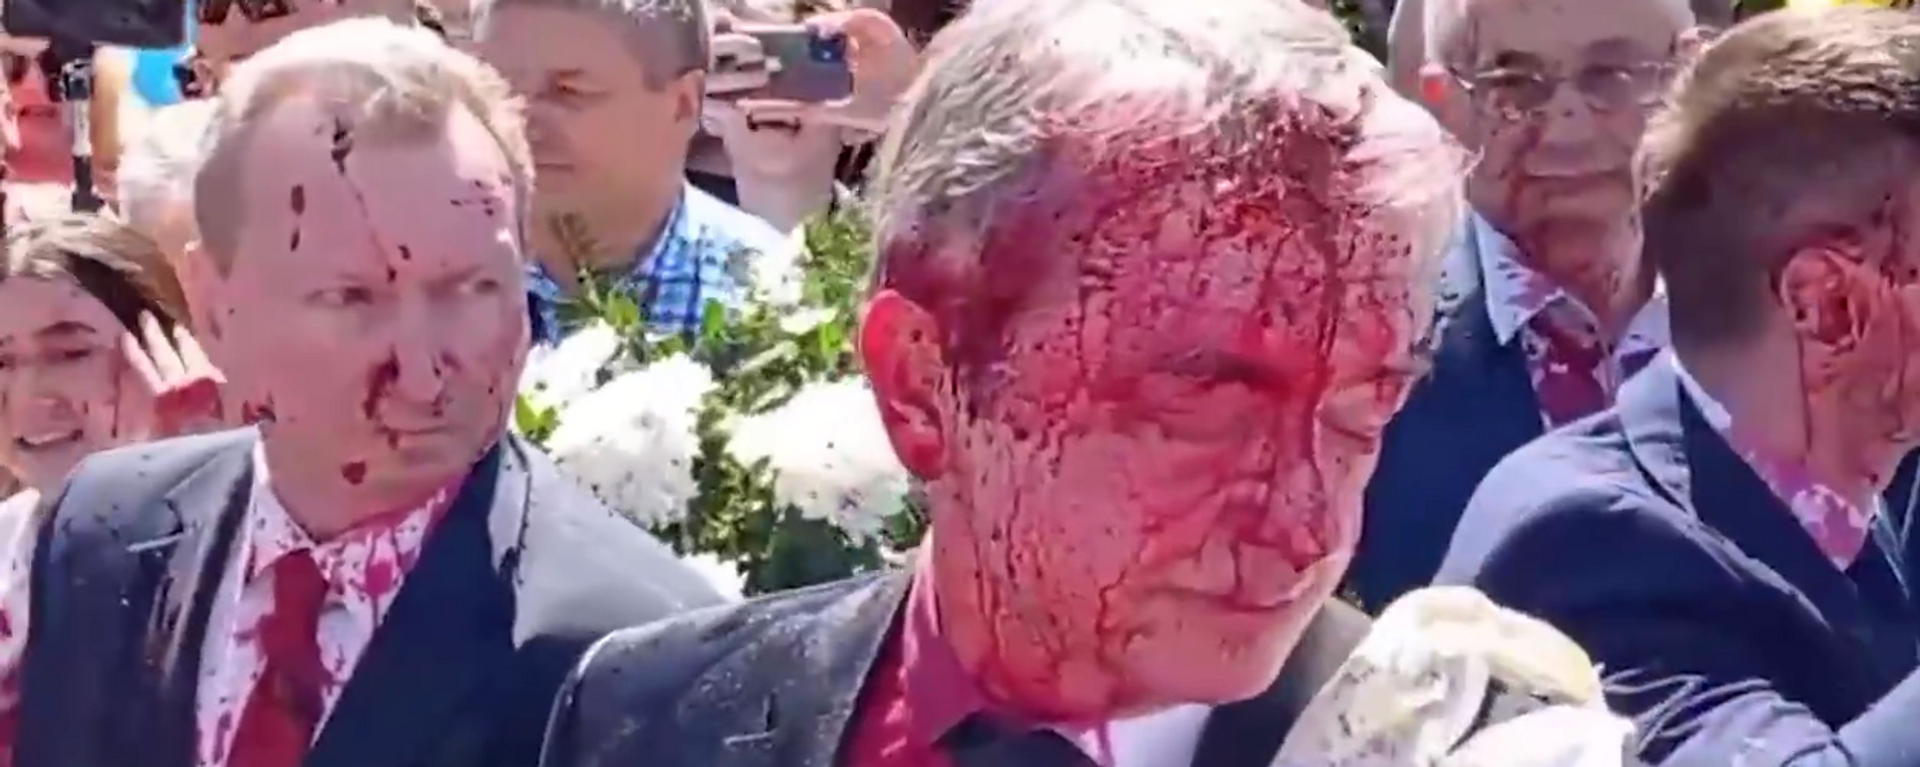 Russian Ambassador to Poland Sergey Andreev was attacked and doused with red paint while trying to lay a wreath at a cemetery of Soviet soldiers in Warsaw - Sputnik International, 1920, 09.05.2022